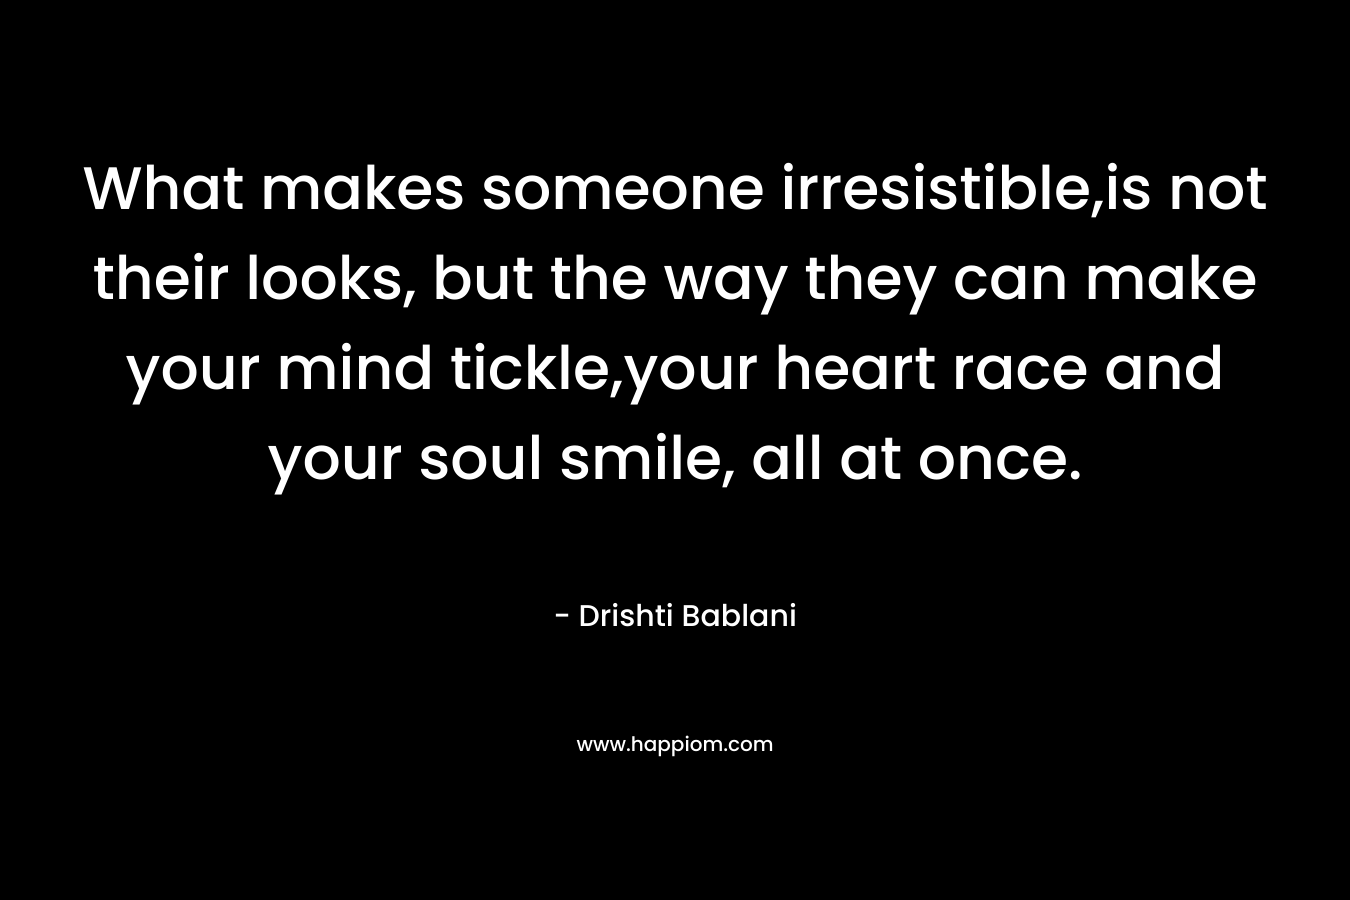 What makes someone irresistible,is not their looks, but the way they can make your mind tickle,your heart race and your soul smile, all at once. – Drishti Bablani